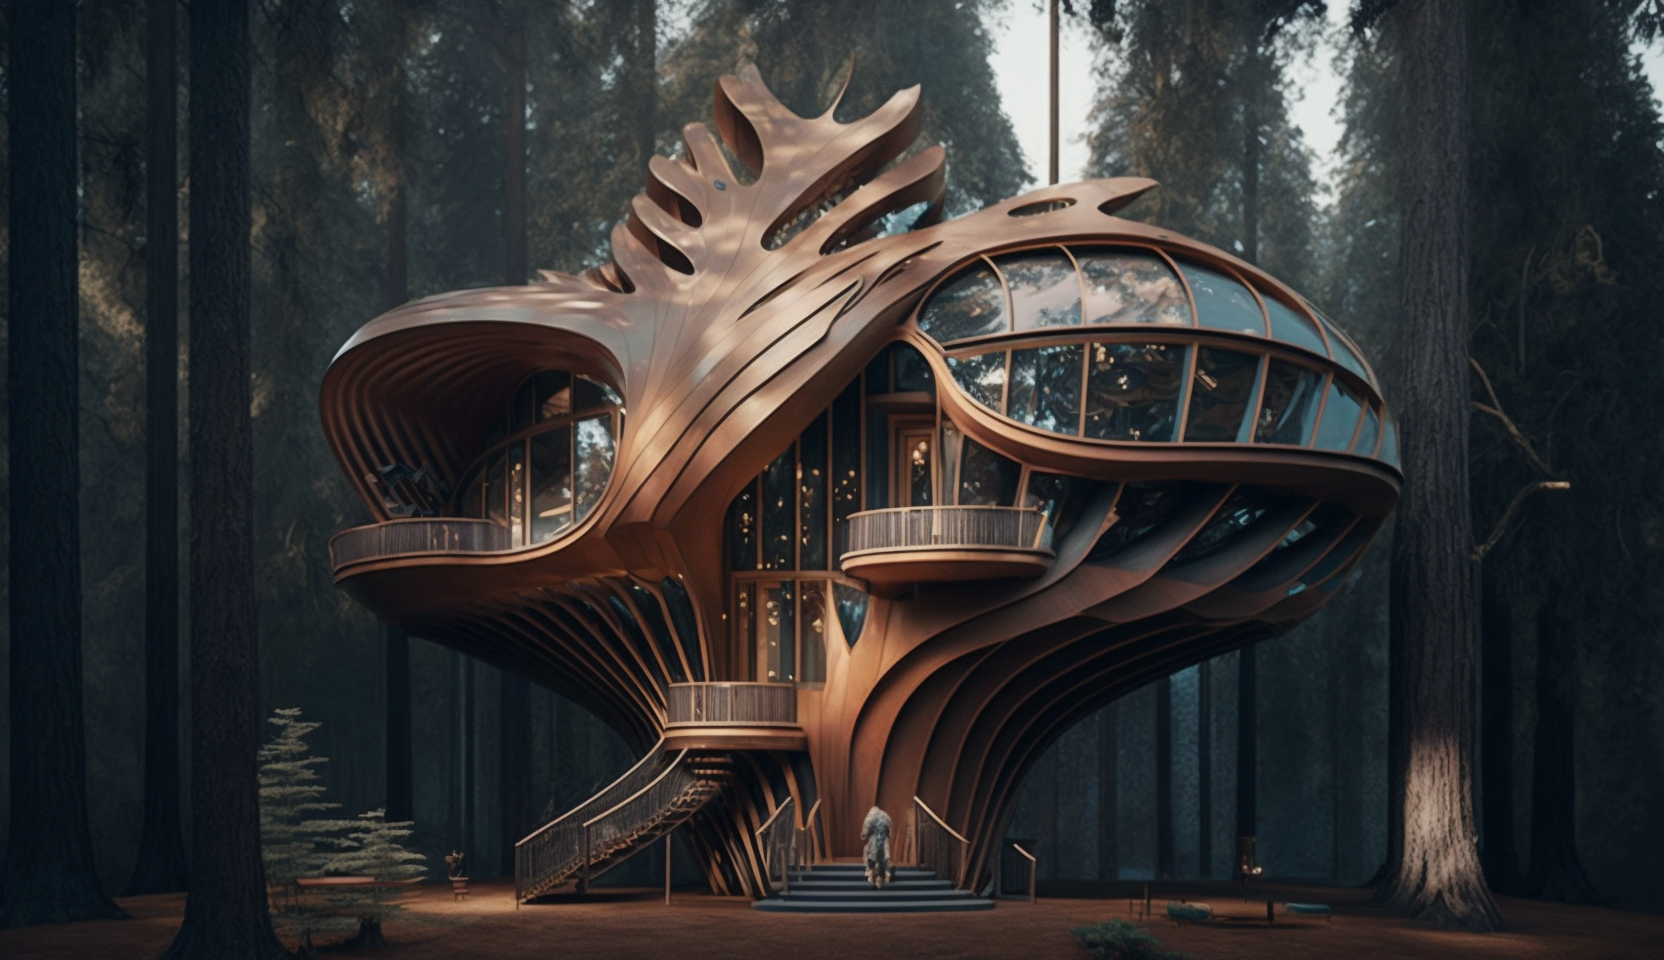 axel05252_A_postmodern_treehouse_shaped_like_a_wing_made_of_rec_f194f7e9-8dc3-47d9-9417-5d6a2034fbb5